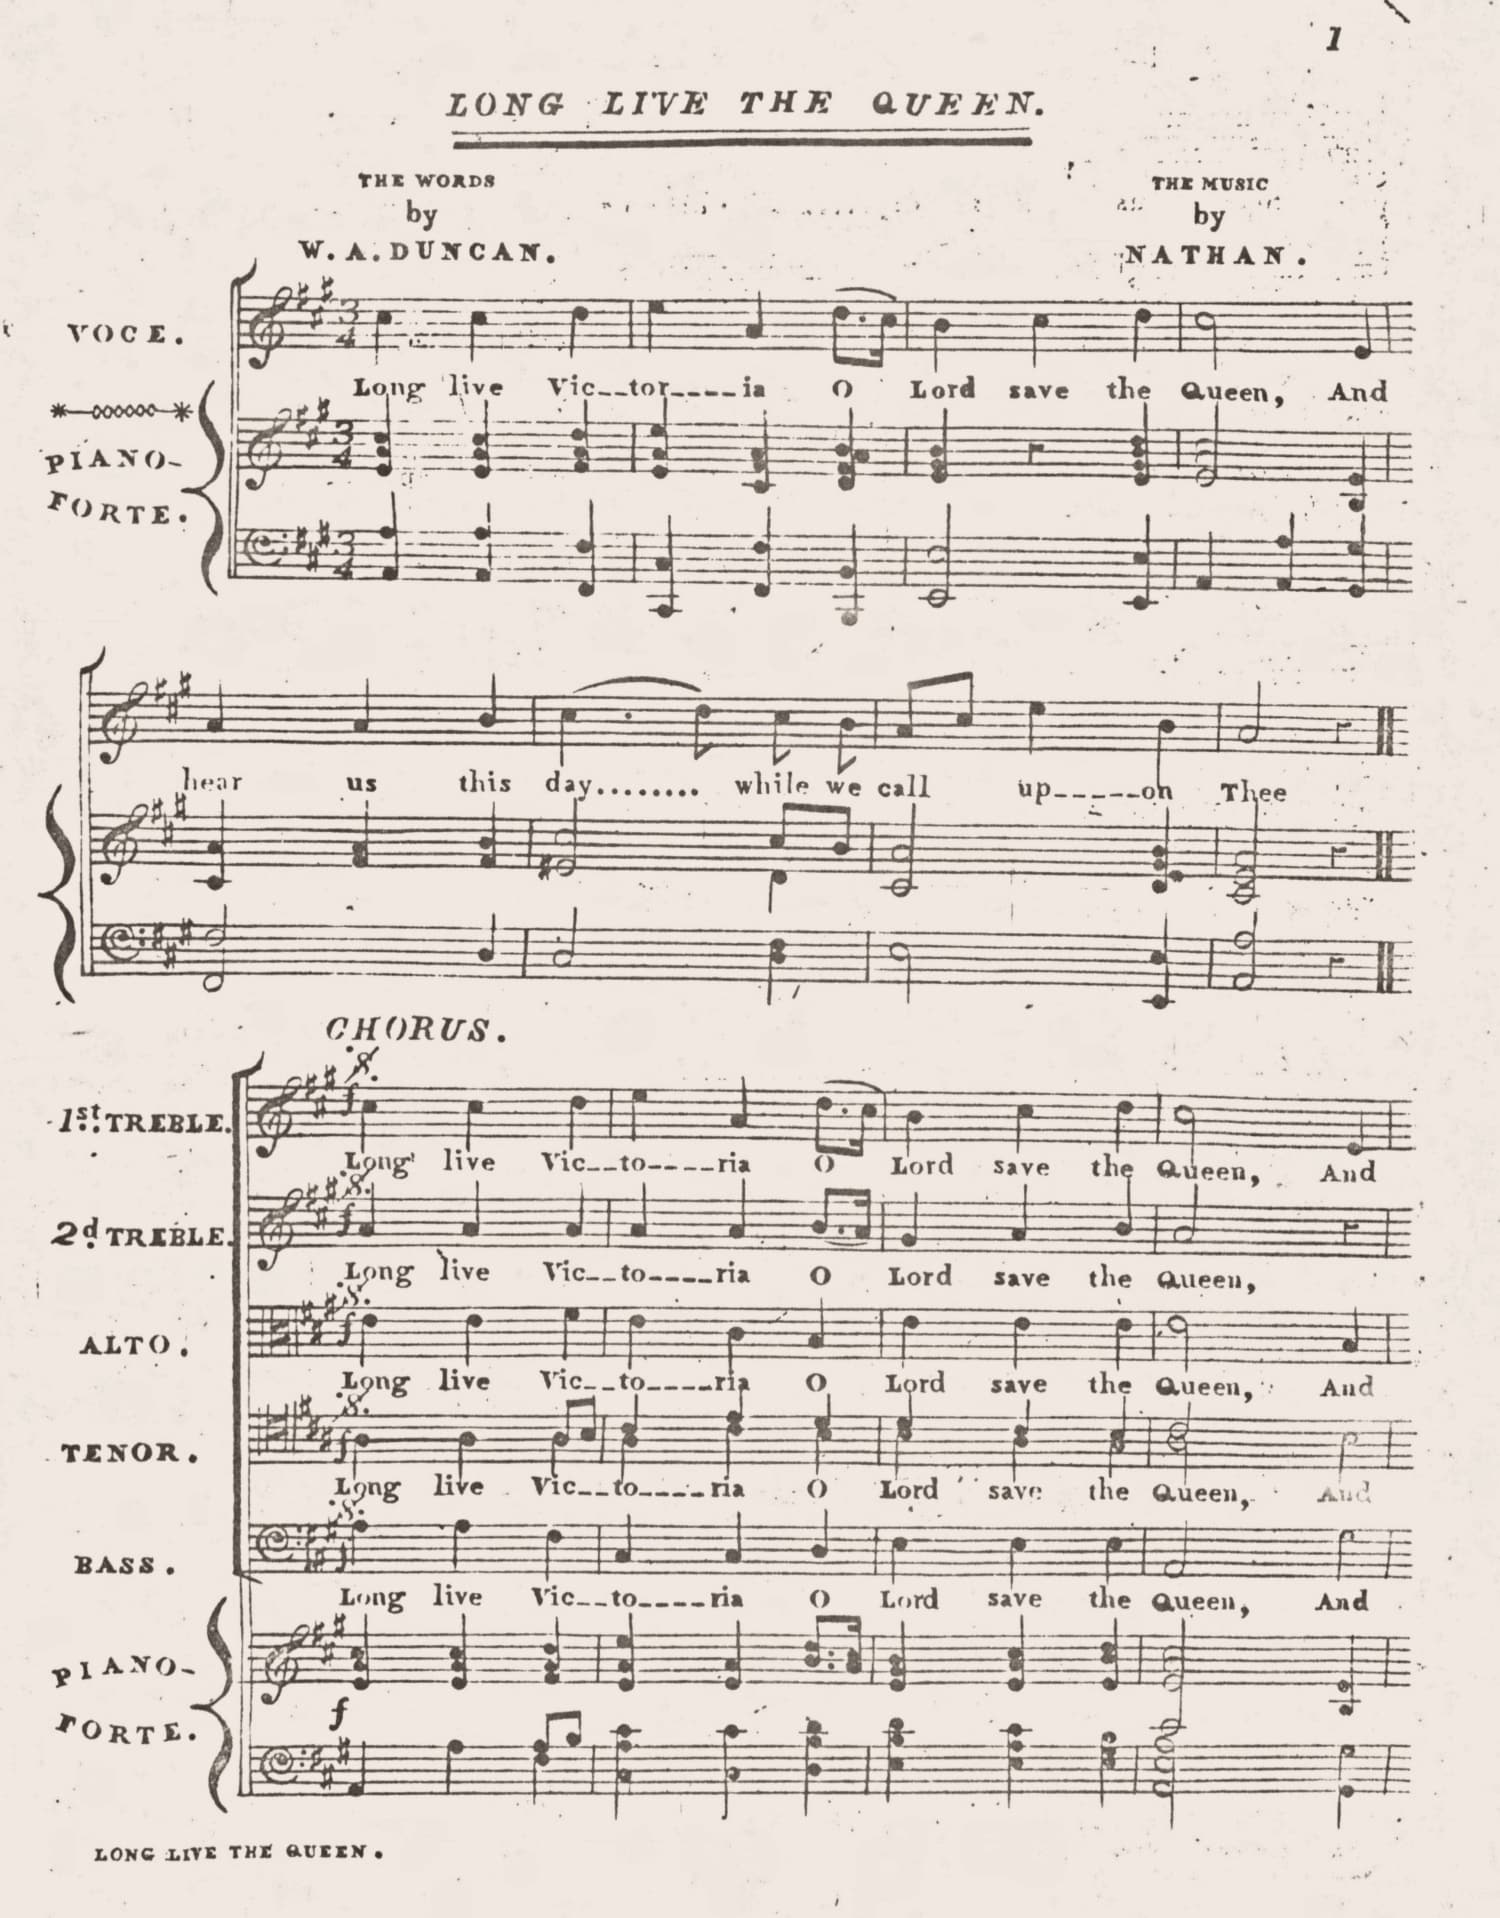 Long live Victoria, words by W. A. Duncan, music by Isaac Nathan (Sydney: F. Ellard, 1841)